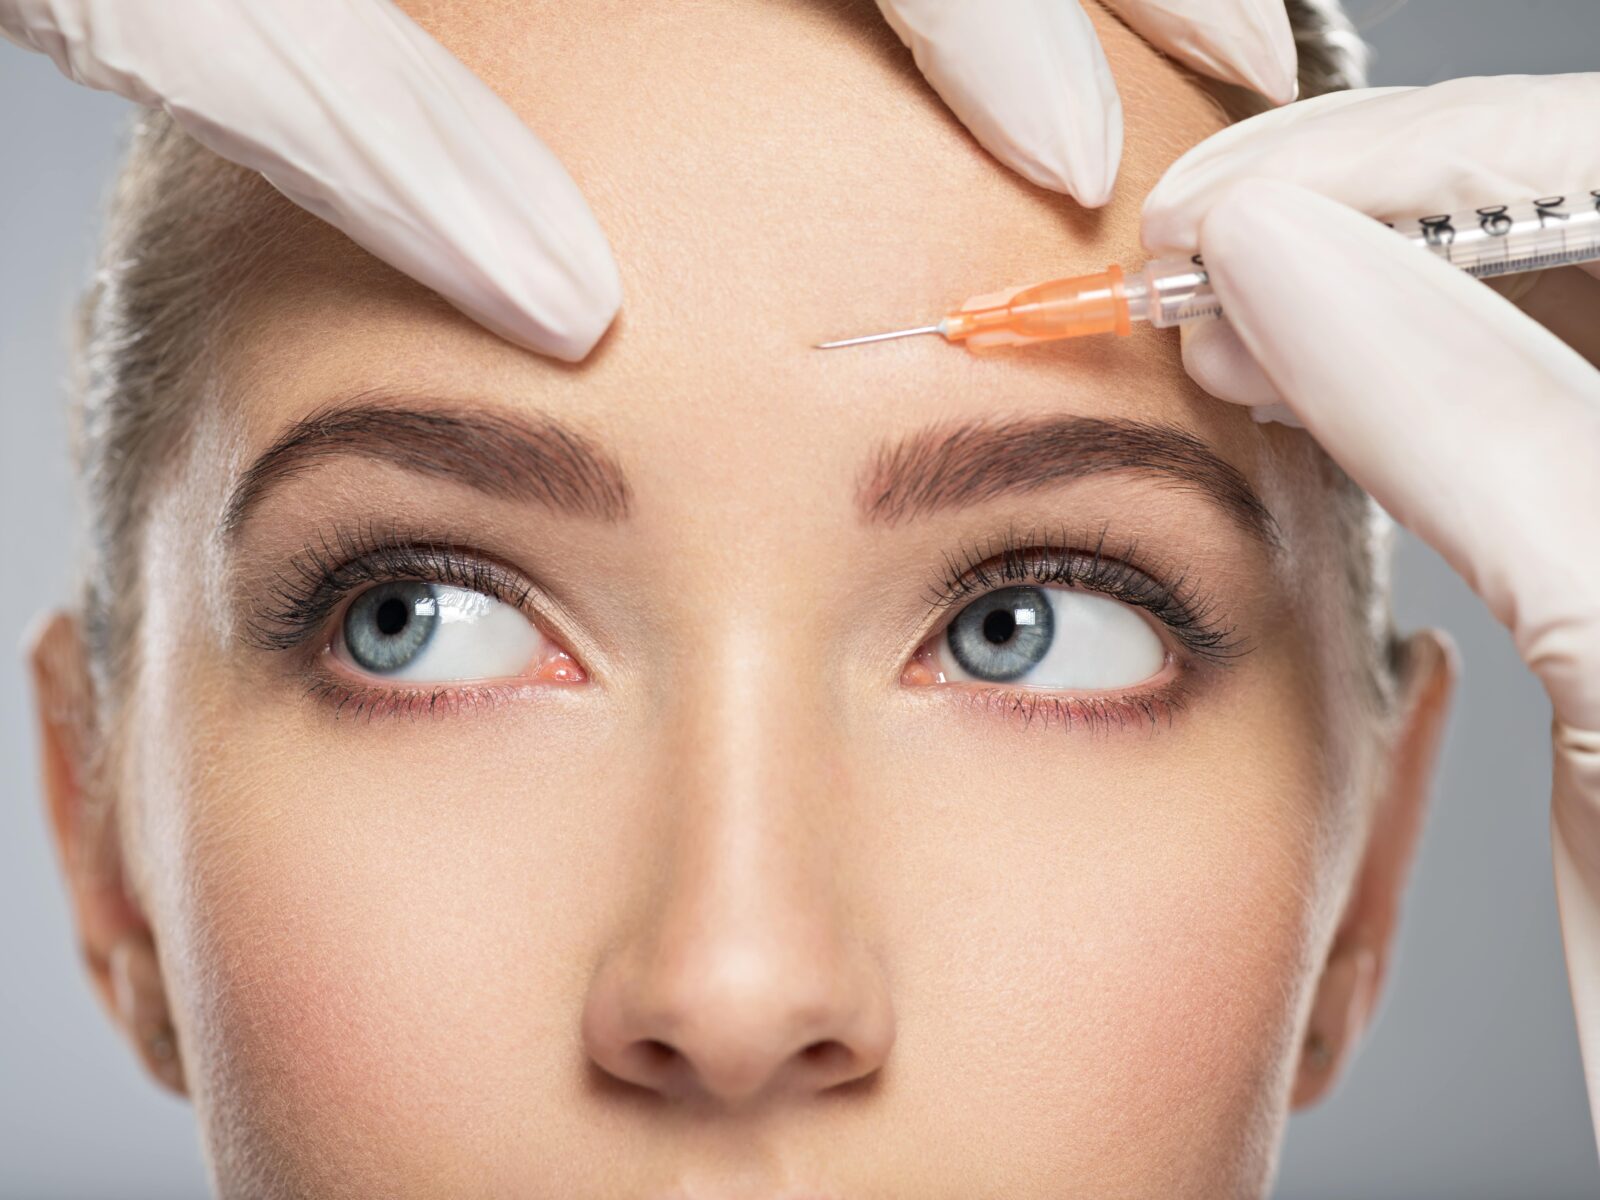 Portrait of young Caucasian woman getting cosmetic injection of botox in forehead. Beautiful woman gets botox injection in her face.